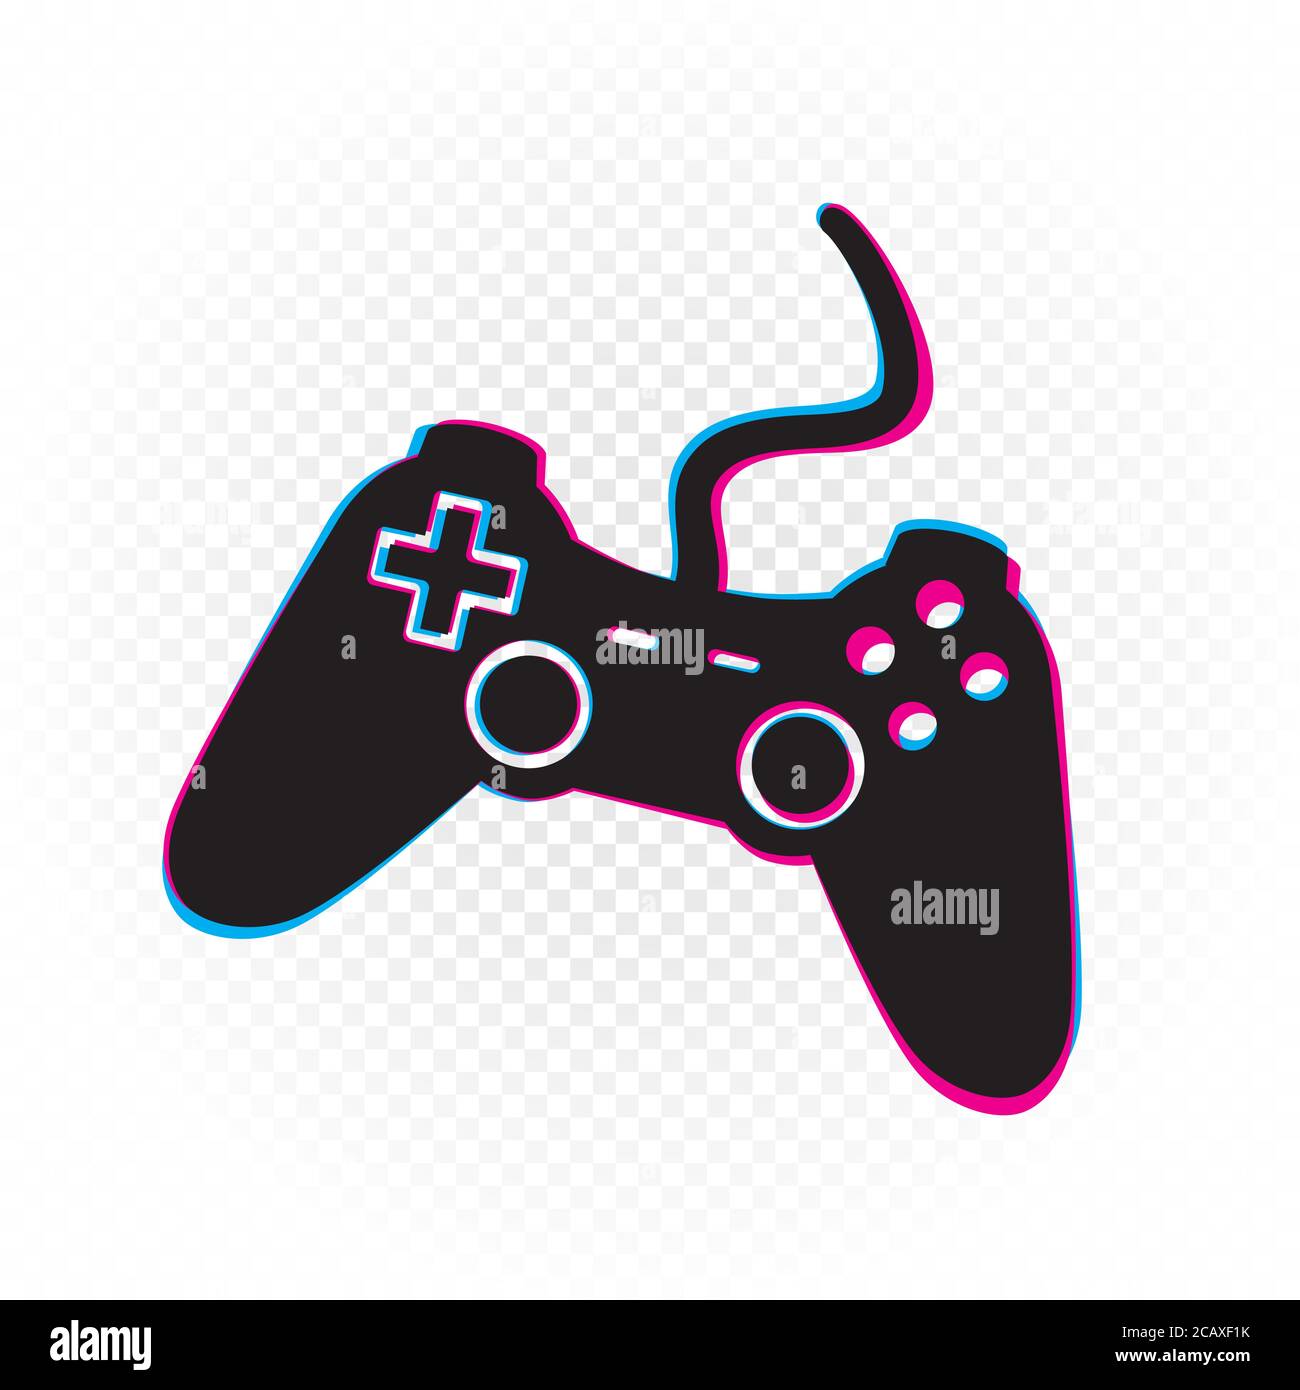 Cheap Gamer Controller Cool Gaming Poster and Prints Spel Kawaii Headphones  Colorful Picture Wall Art Canvas Painting Room Decor Gifts